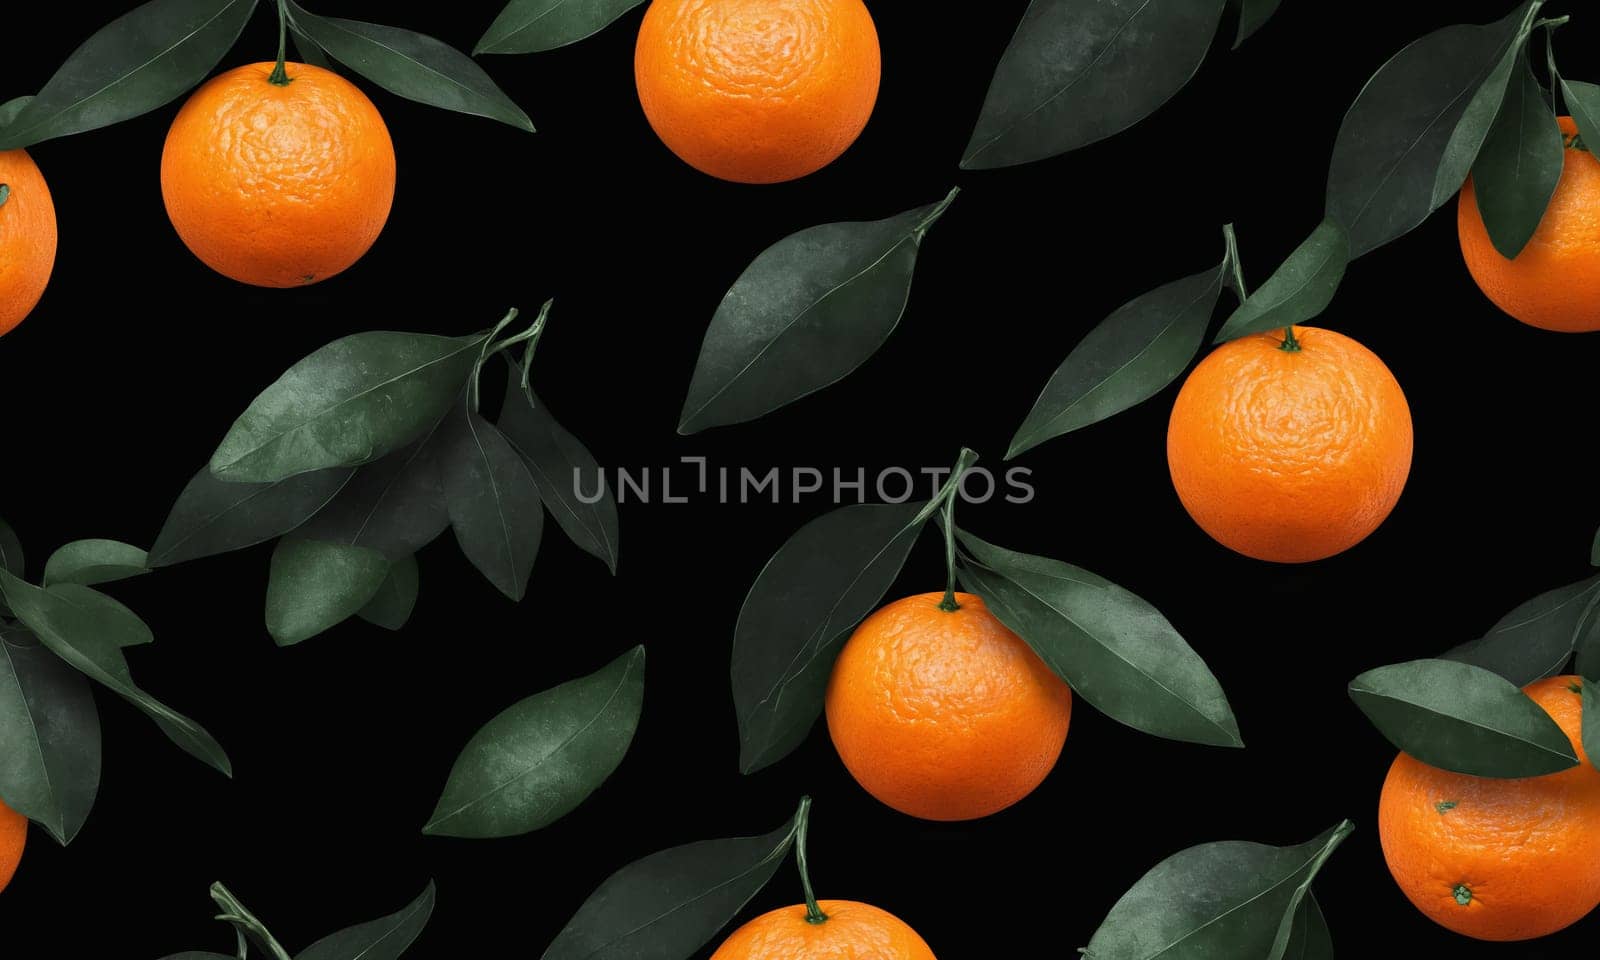 A seamless pattern featuring oranges with green leaves on a black background. This design showcases various citrus fruits like Rangpur, Valencia orange, and Tangelo